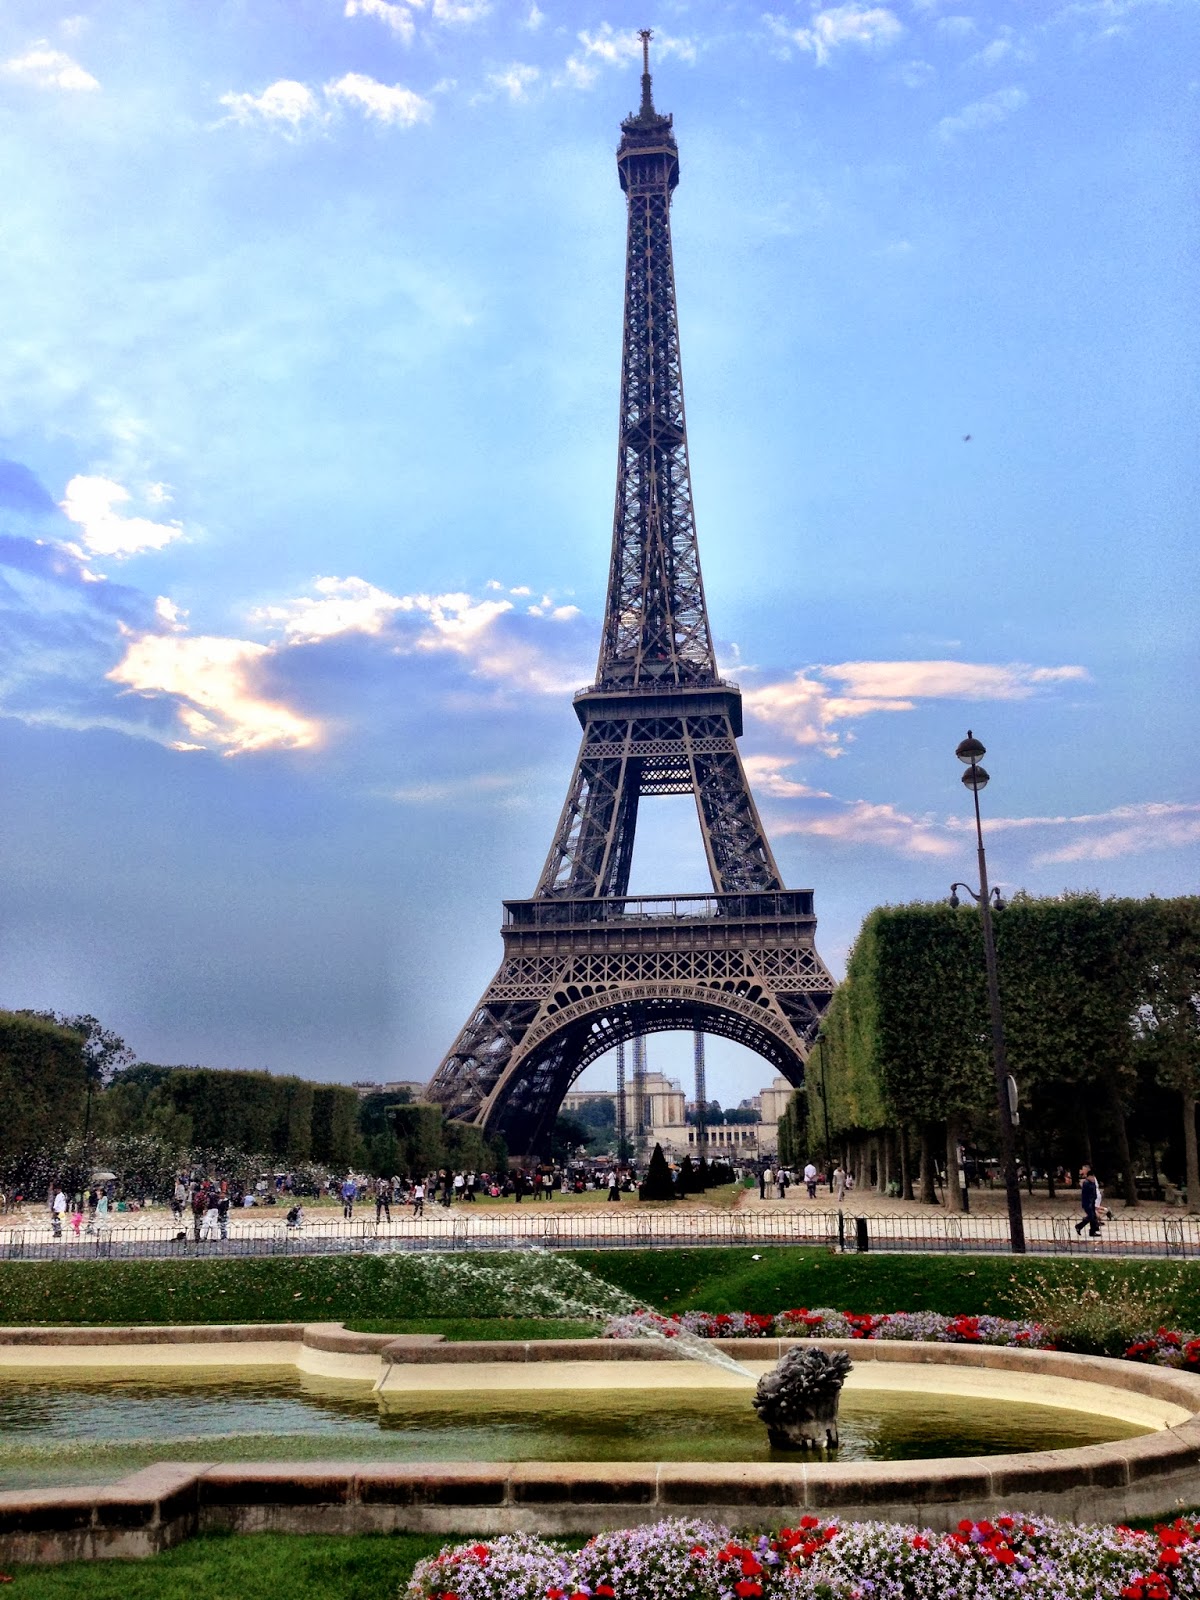 travel tuesday: paris museums and eiffel tower!